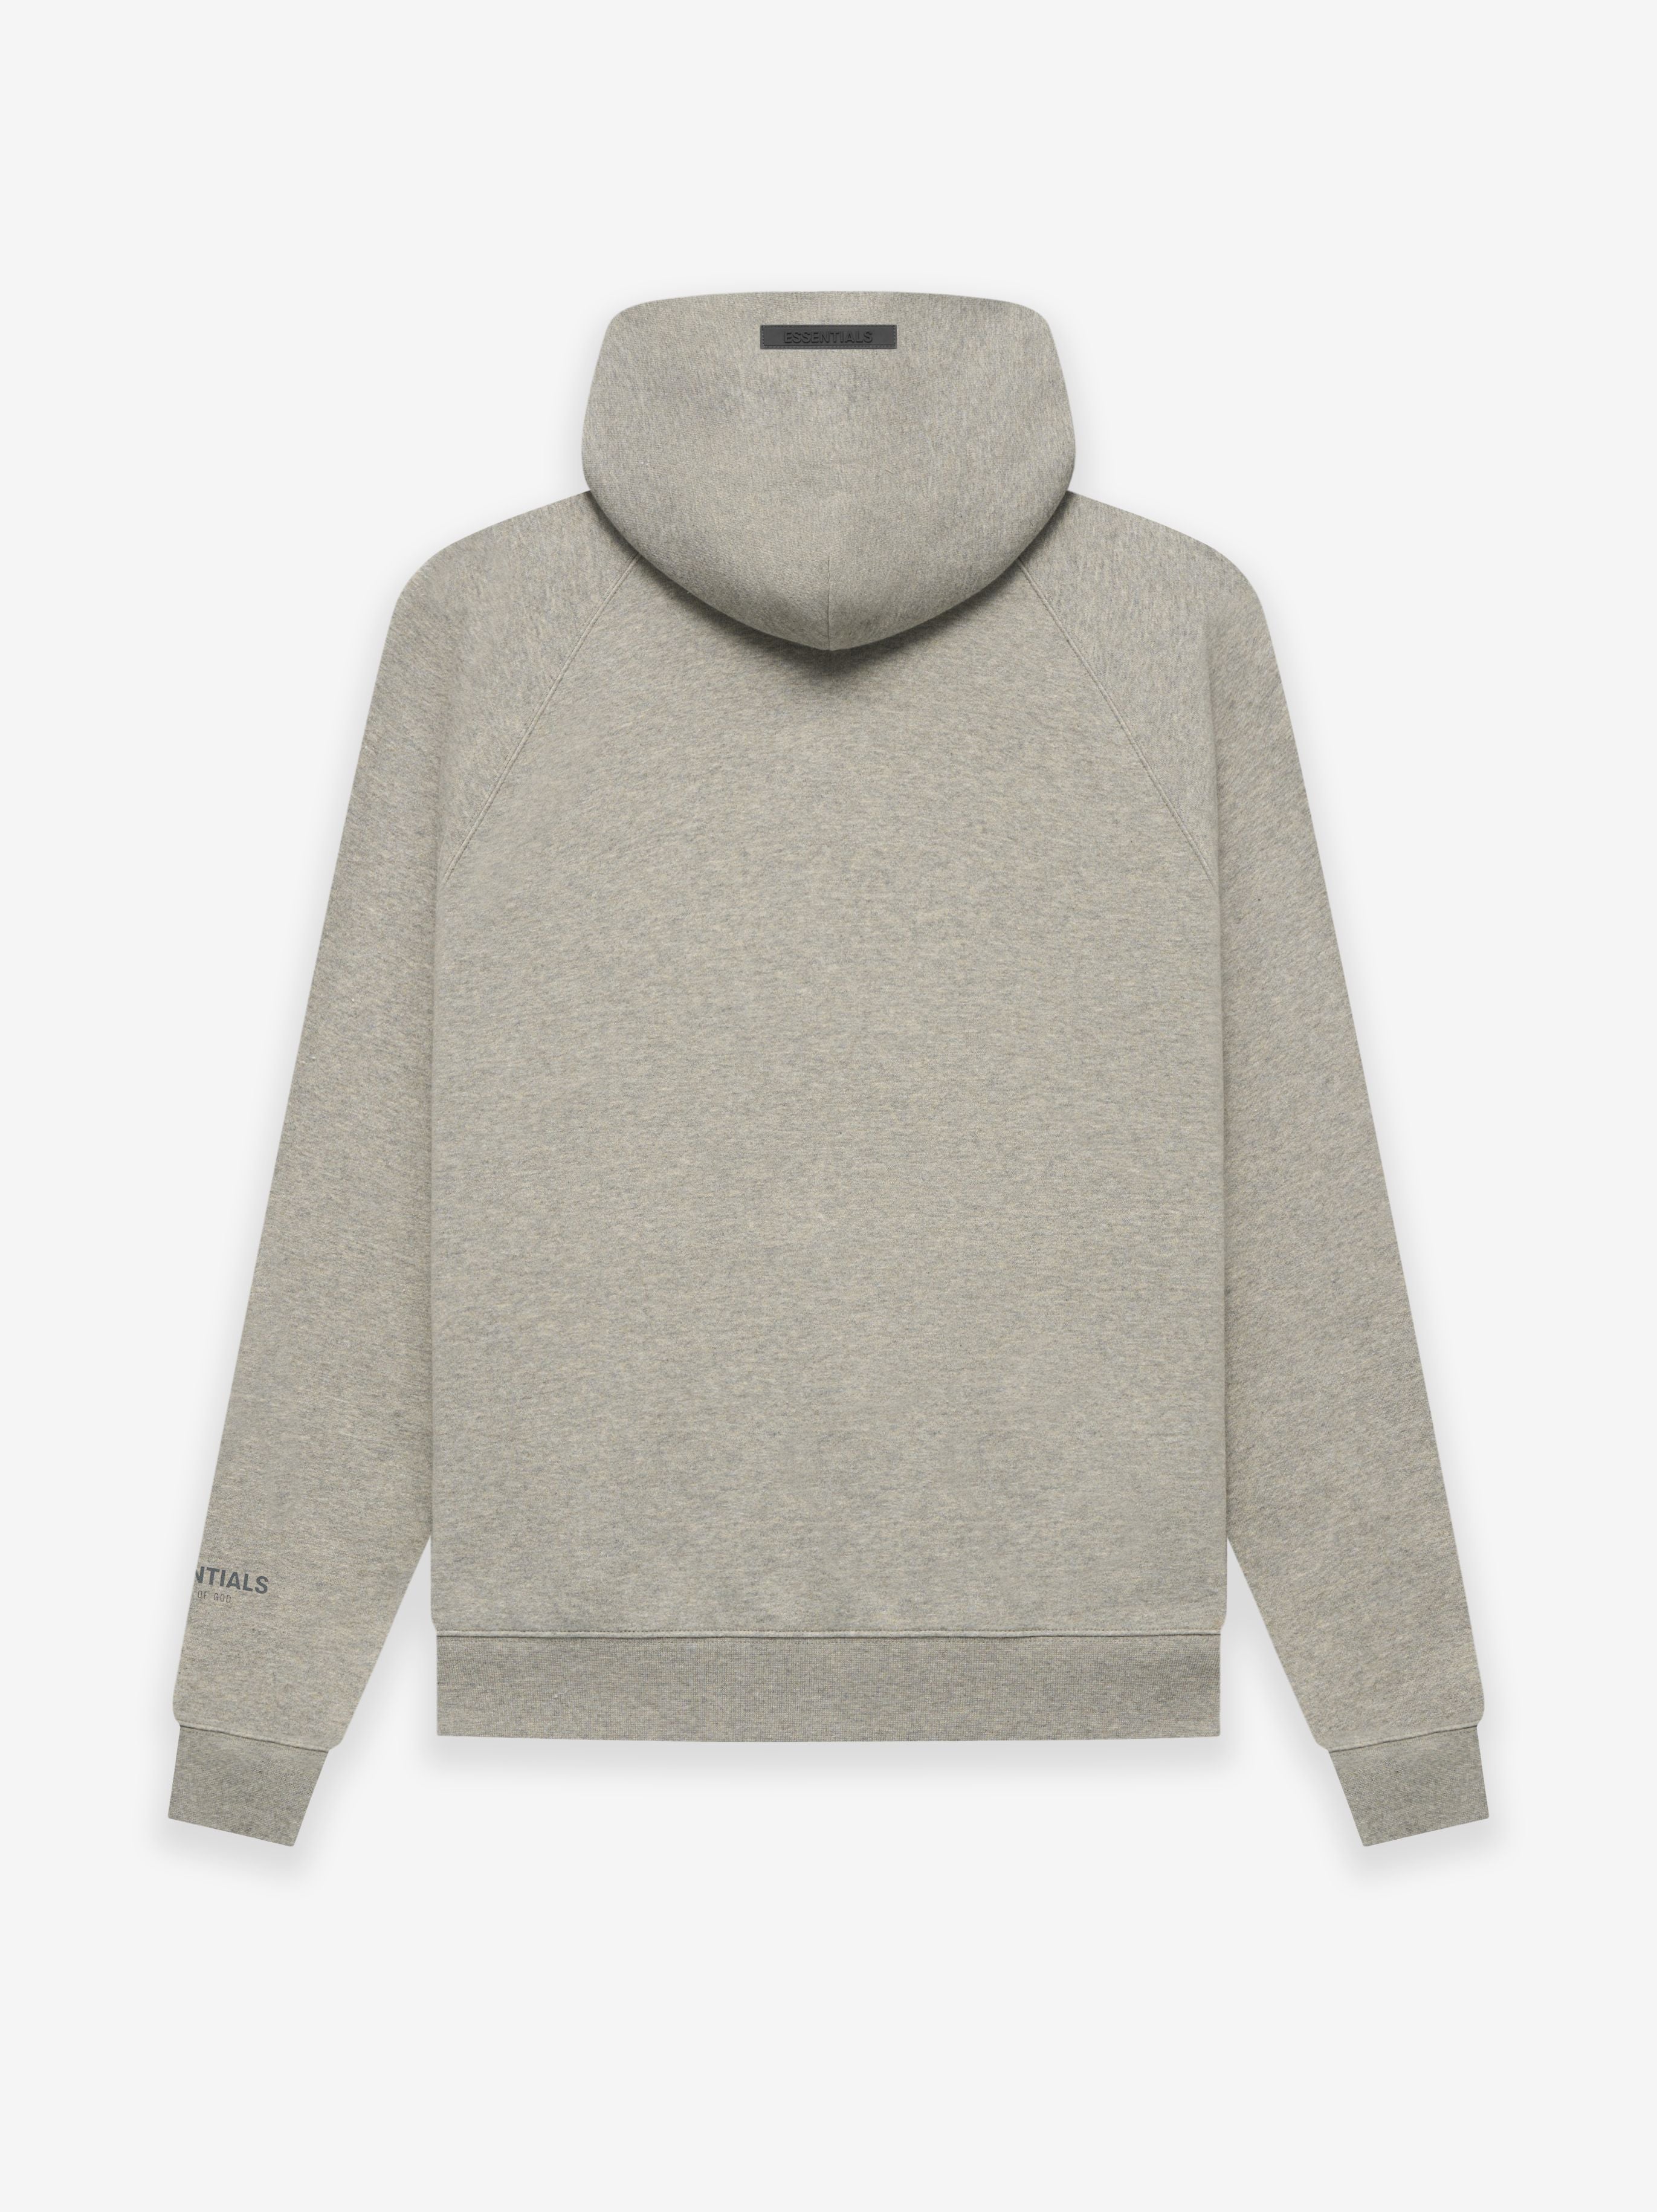 ESSENTIALS Pullover Hoodie in Dark Heather Oatmeal | Fear of God